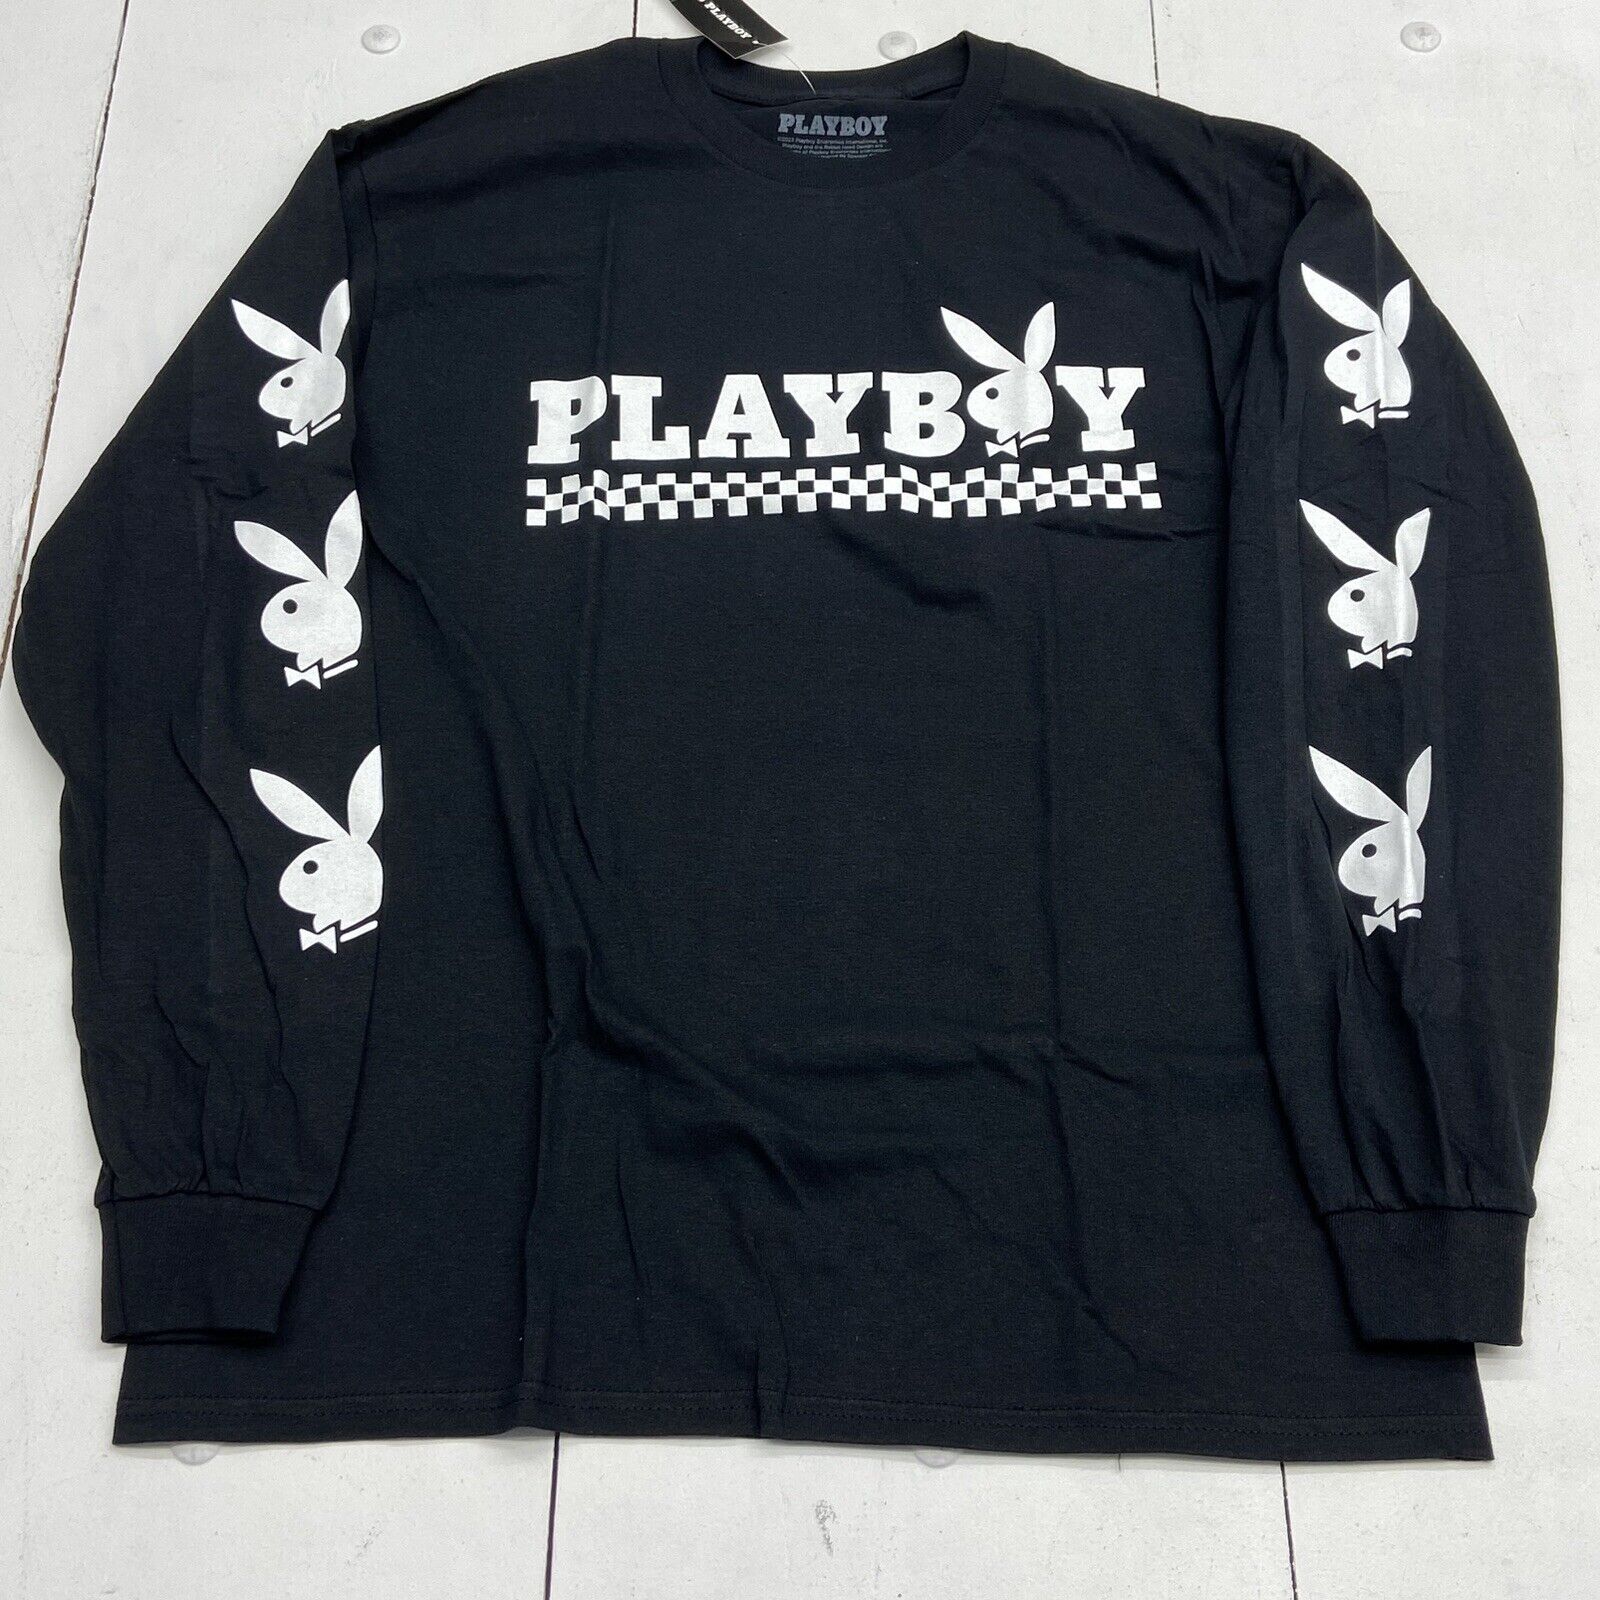 Playboy Black Checkered Bunny Graphic Long Sleeve T-Shirt Adult Size S NEW